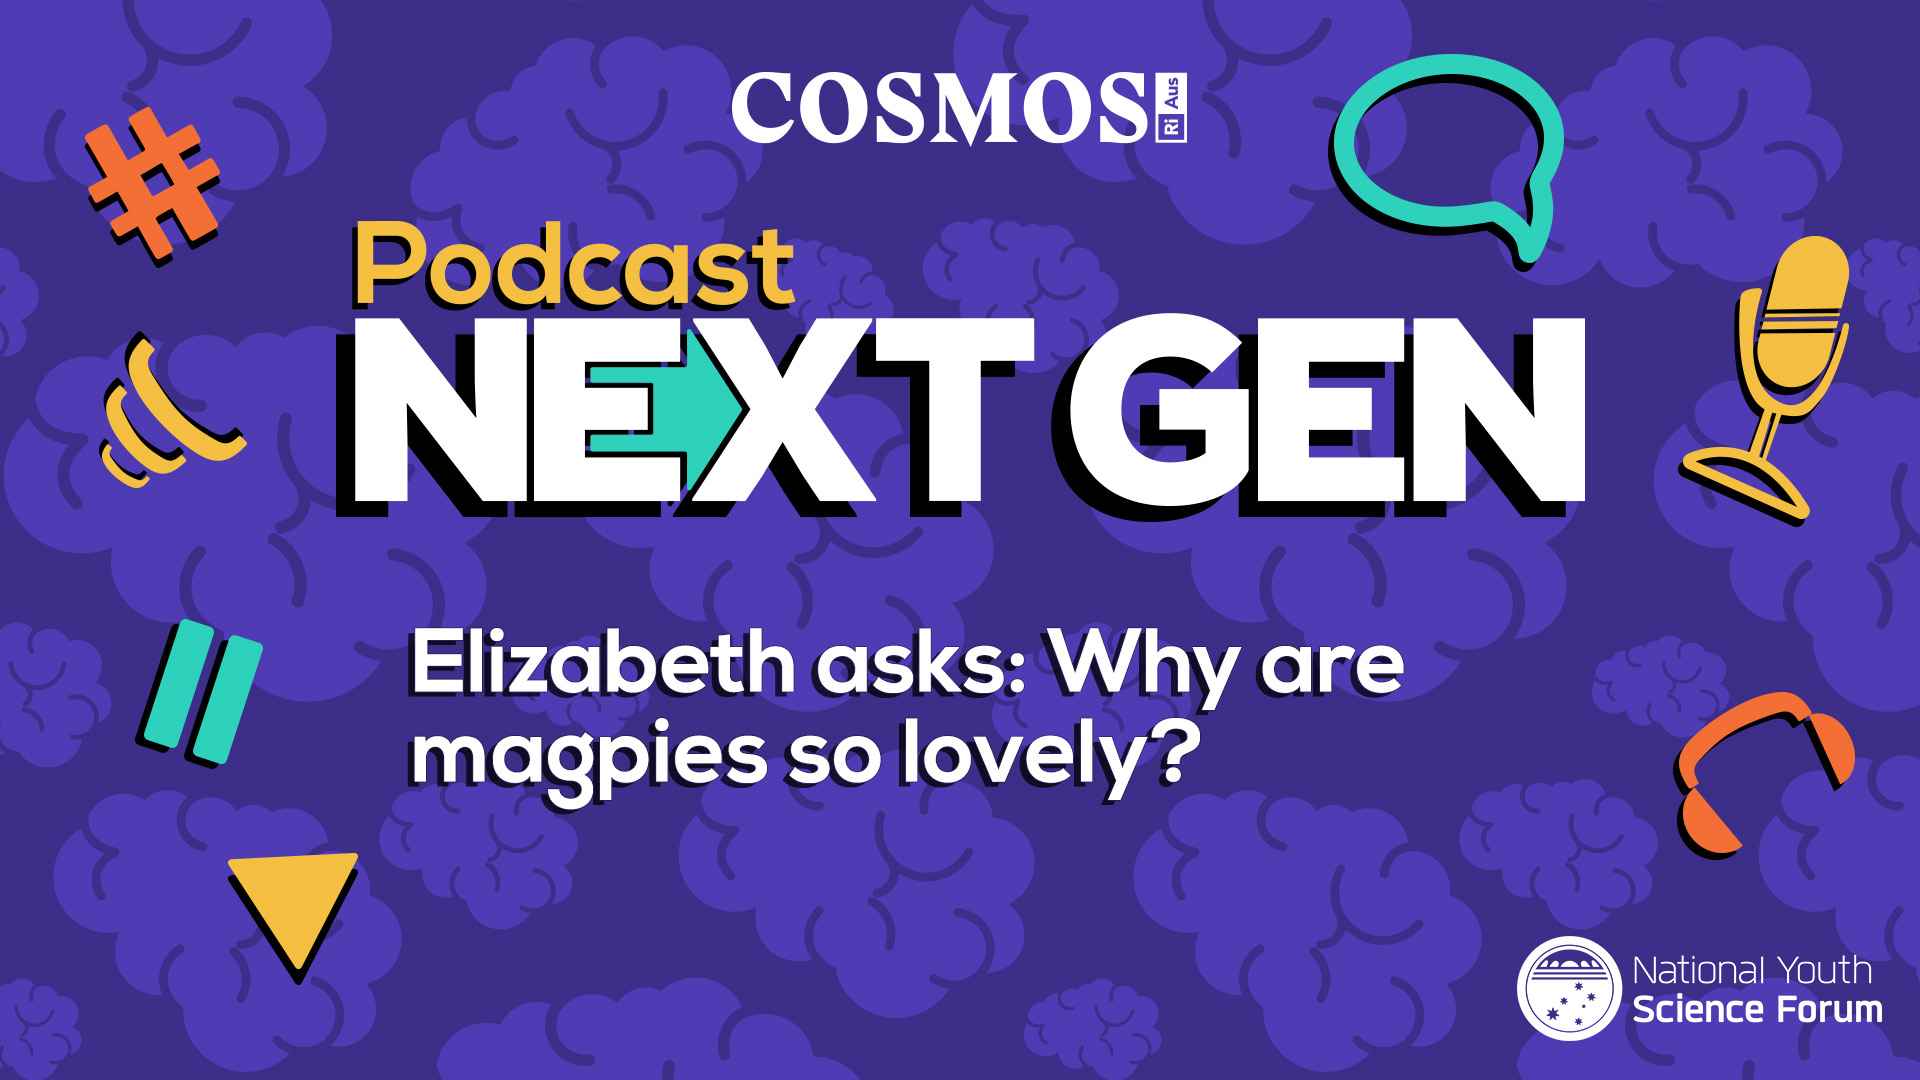 PODCAST NEXT GEN: Why are magpies so lovely?